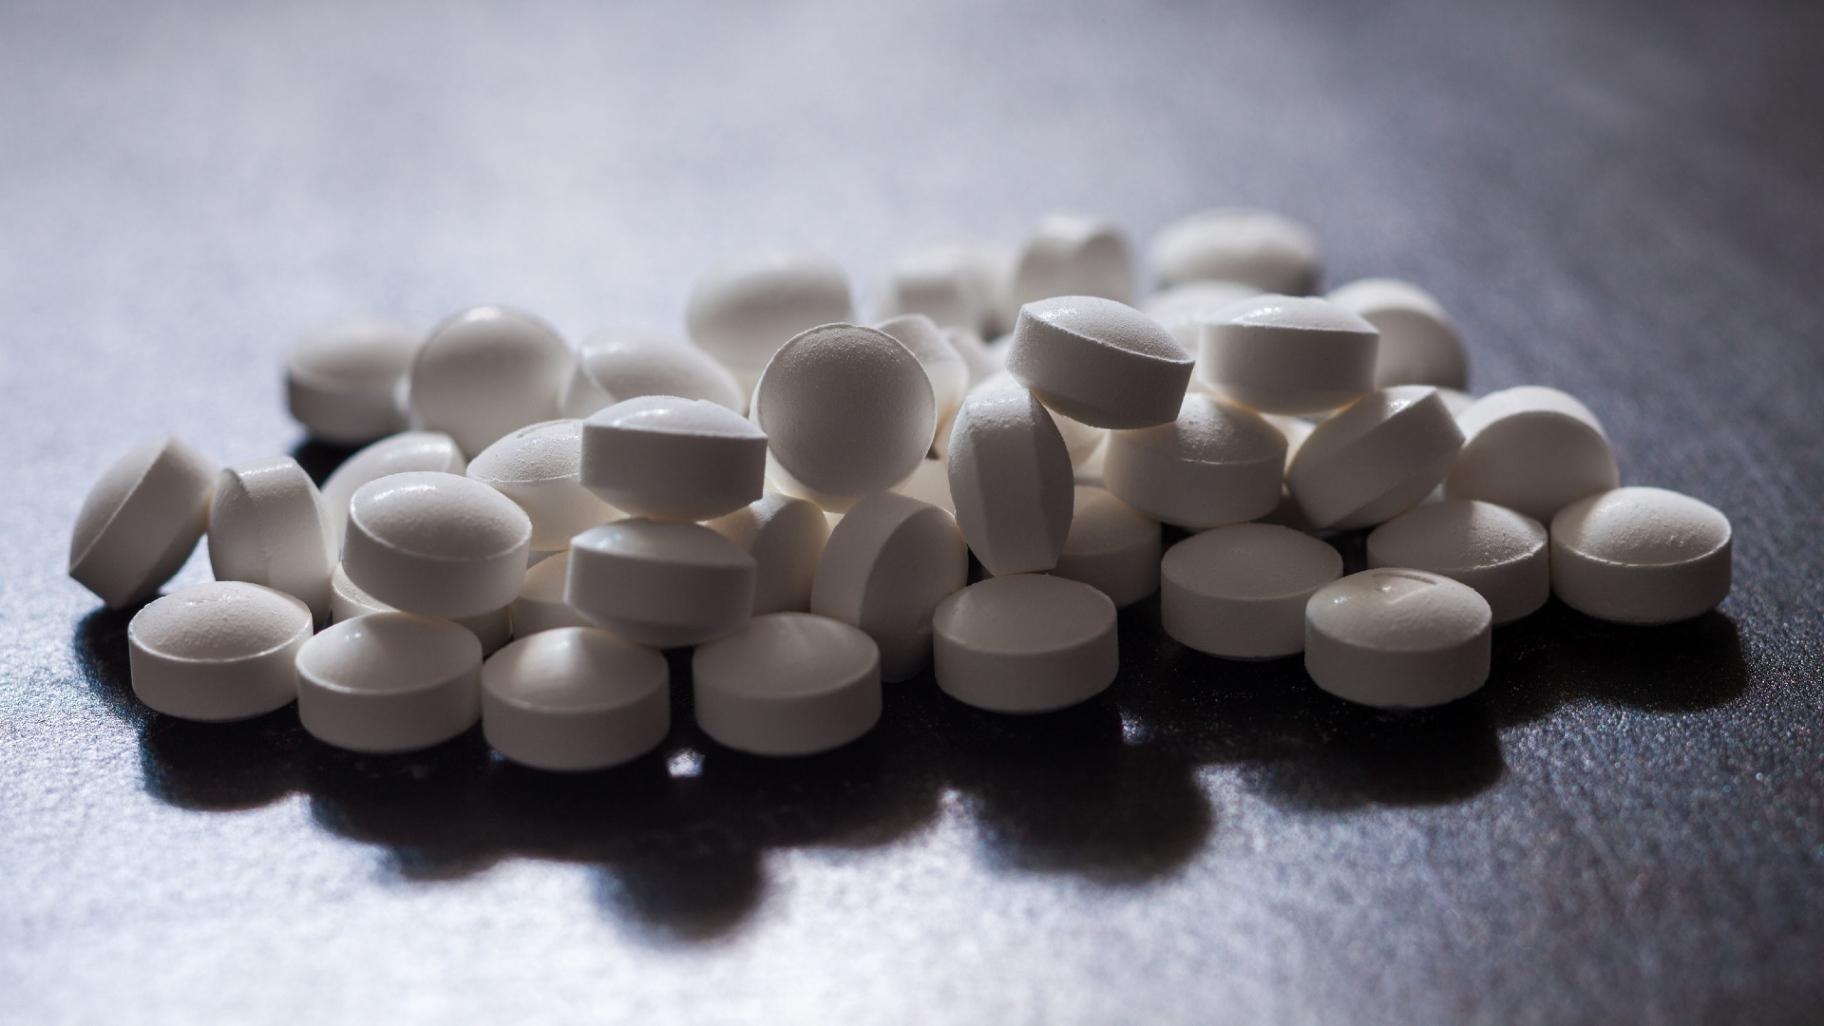 Overdose deaths with evidence of counterfeit pill use became more than twice as common between the second half of 2019 and the end of 2021, according to a new CDC report. (Tomas Nevesely / iStockphoto / Getty Images)